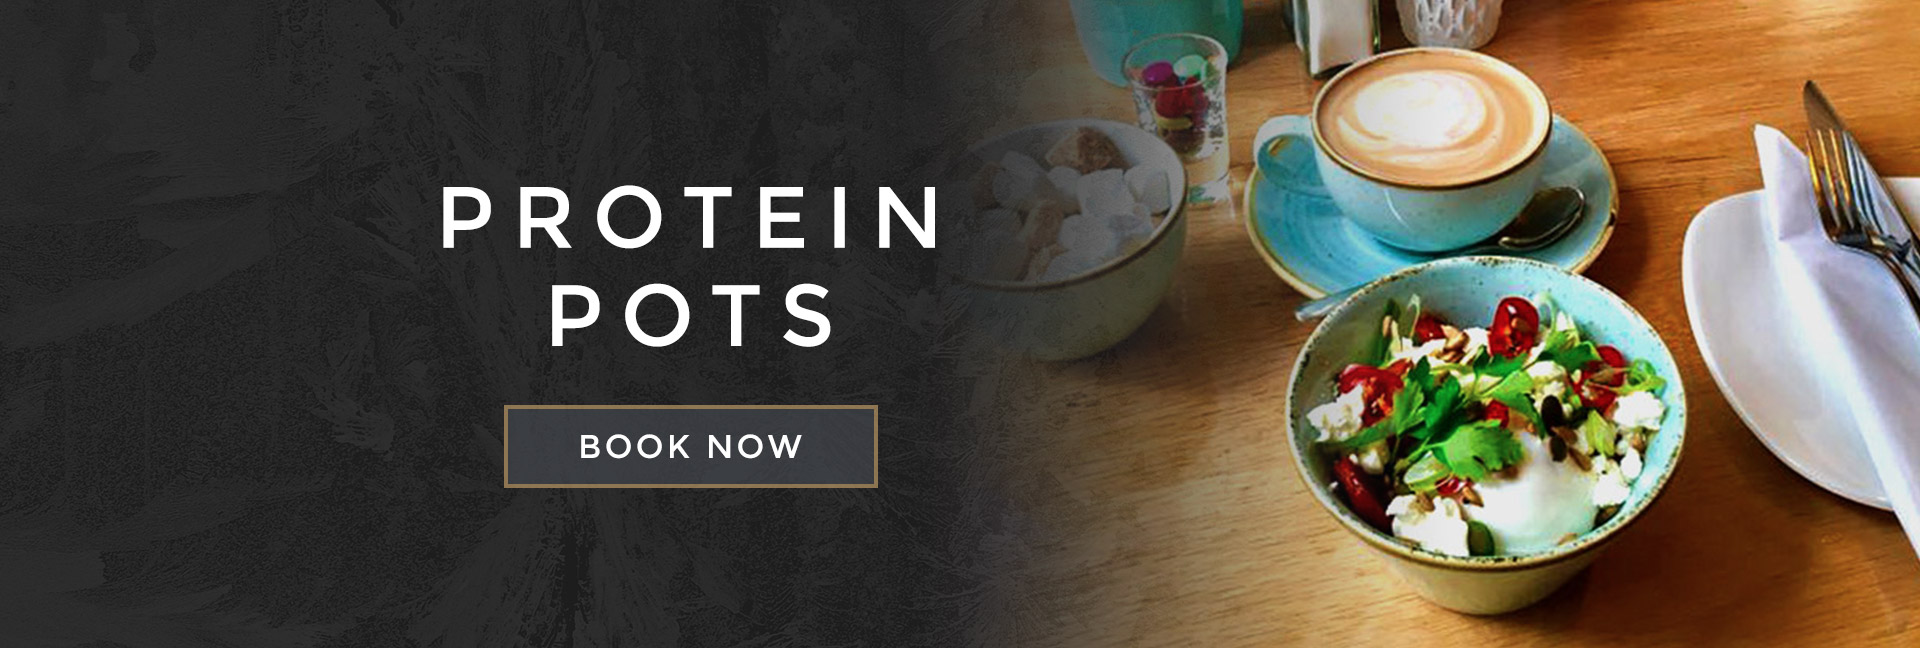 Protein pots at All Bar One Greek Street Leeds - Book your table